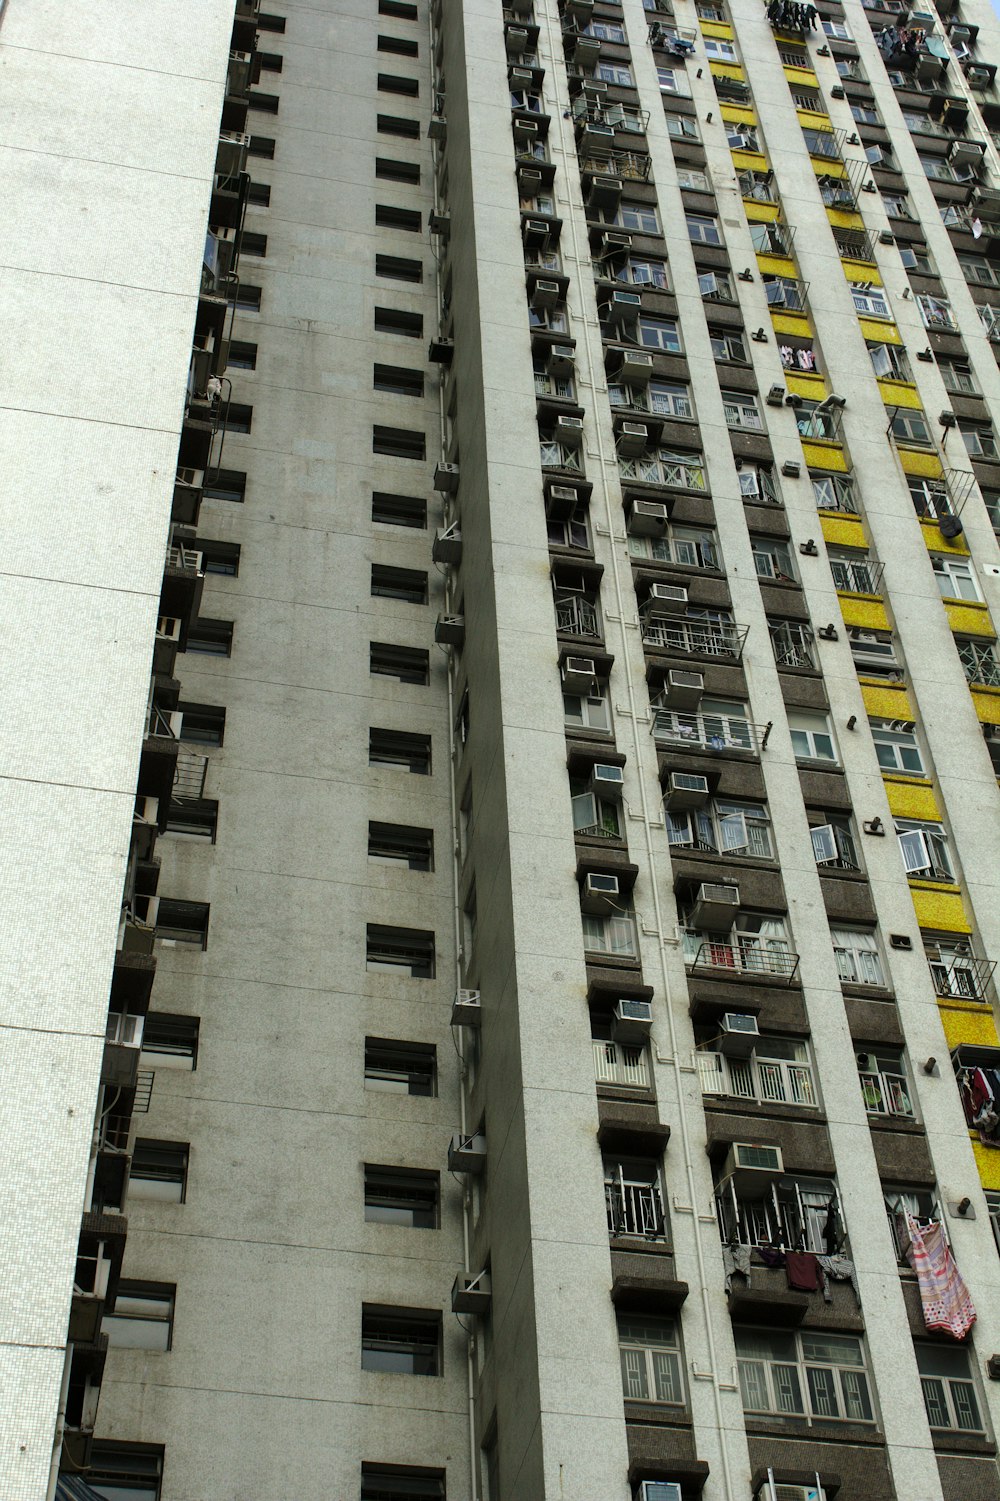 low angle view of apartment complex building